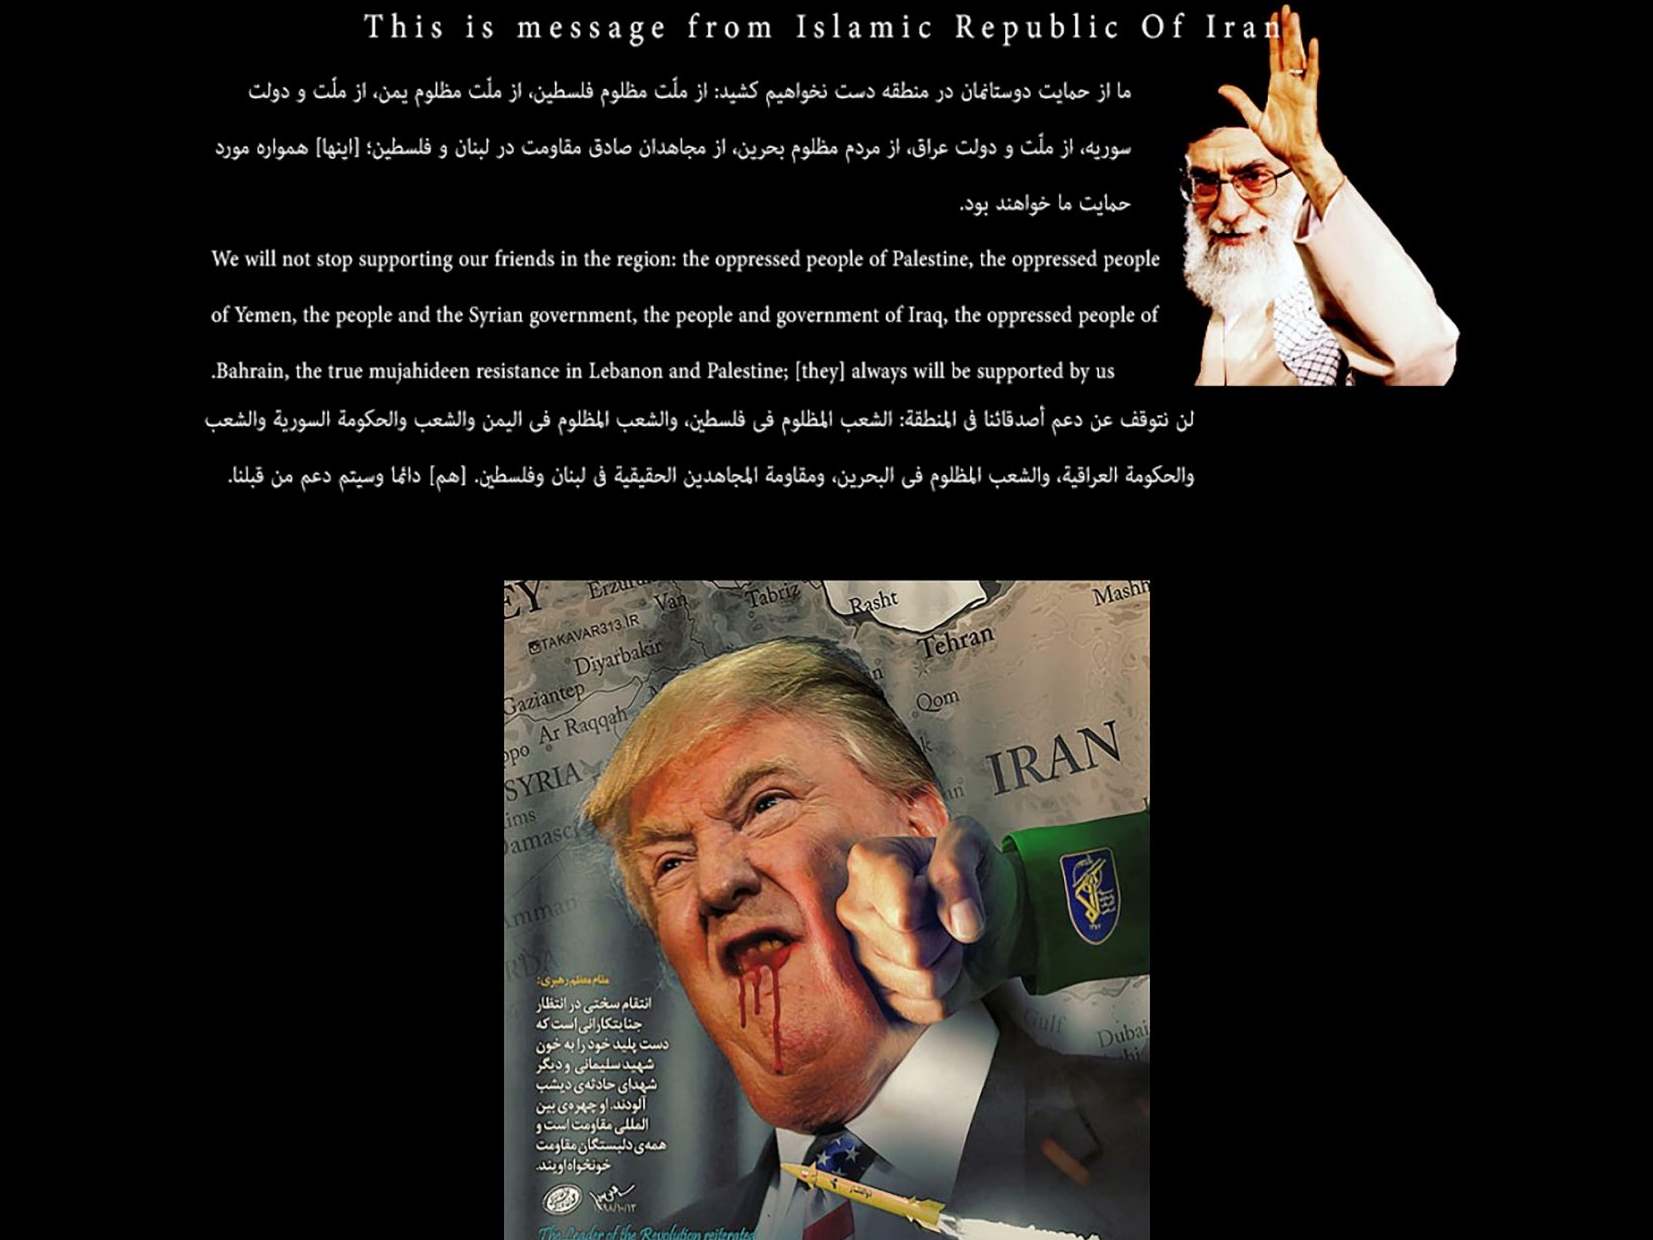 US government website hacked to show pro-Iranian messages and bloodied image of Trump